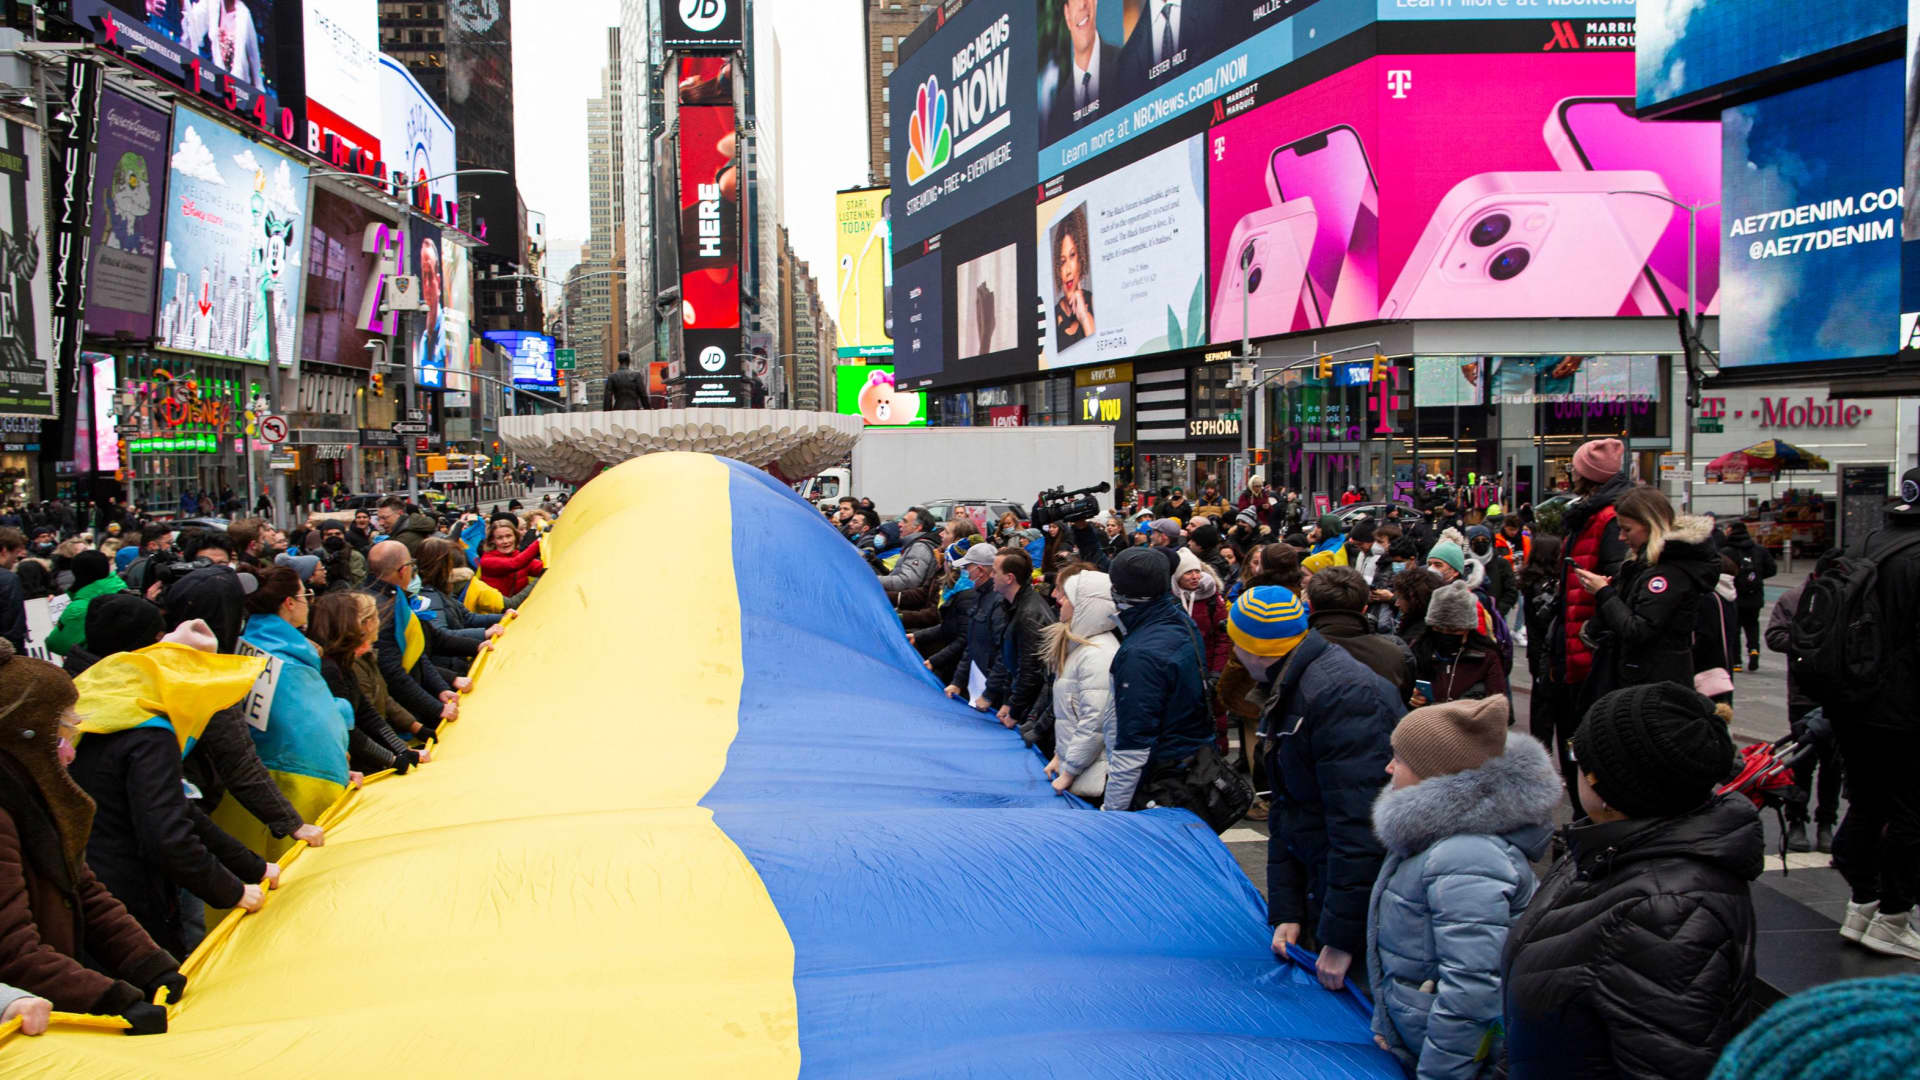 Demonstrators hold a Ukrainian flag as they protest in support of Ukraine, in Times Square New York, on February 24, 2022.